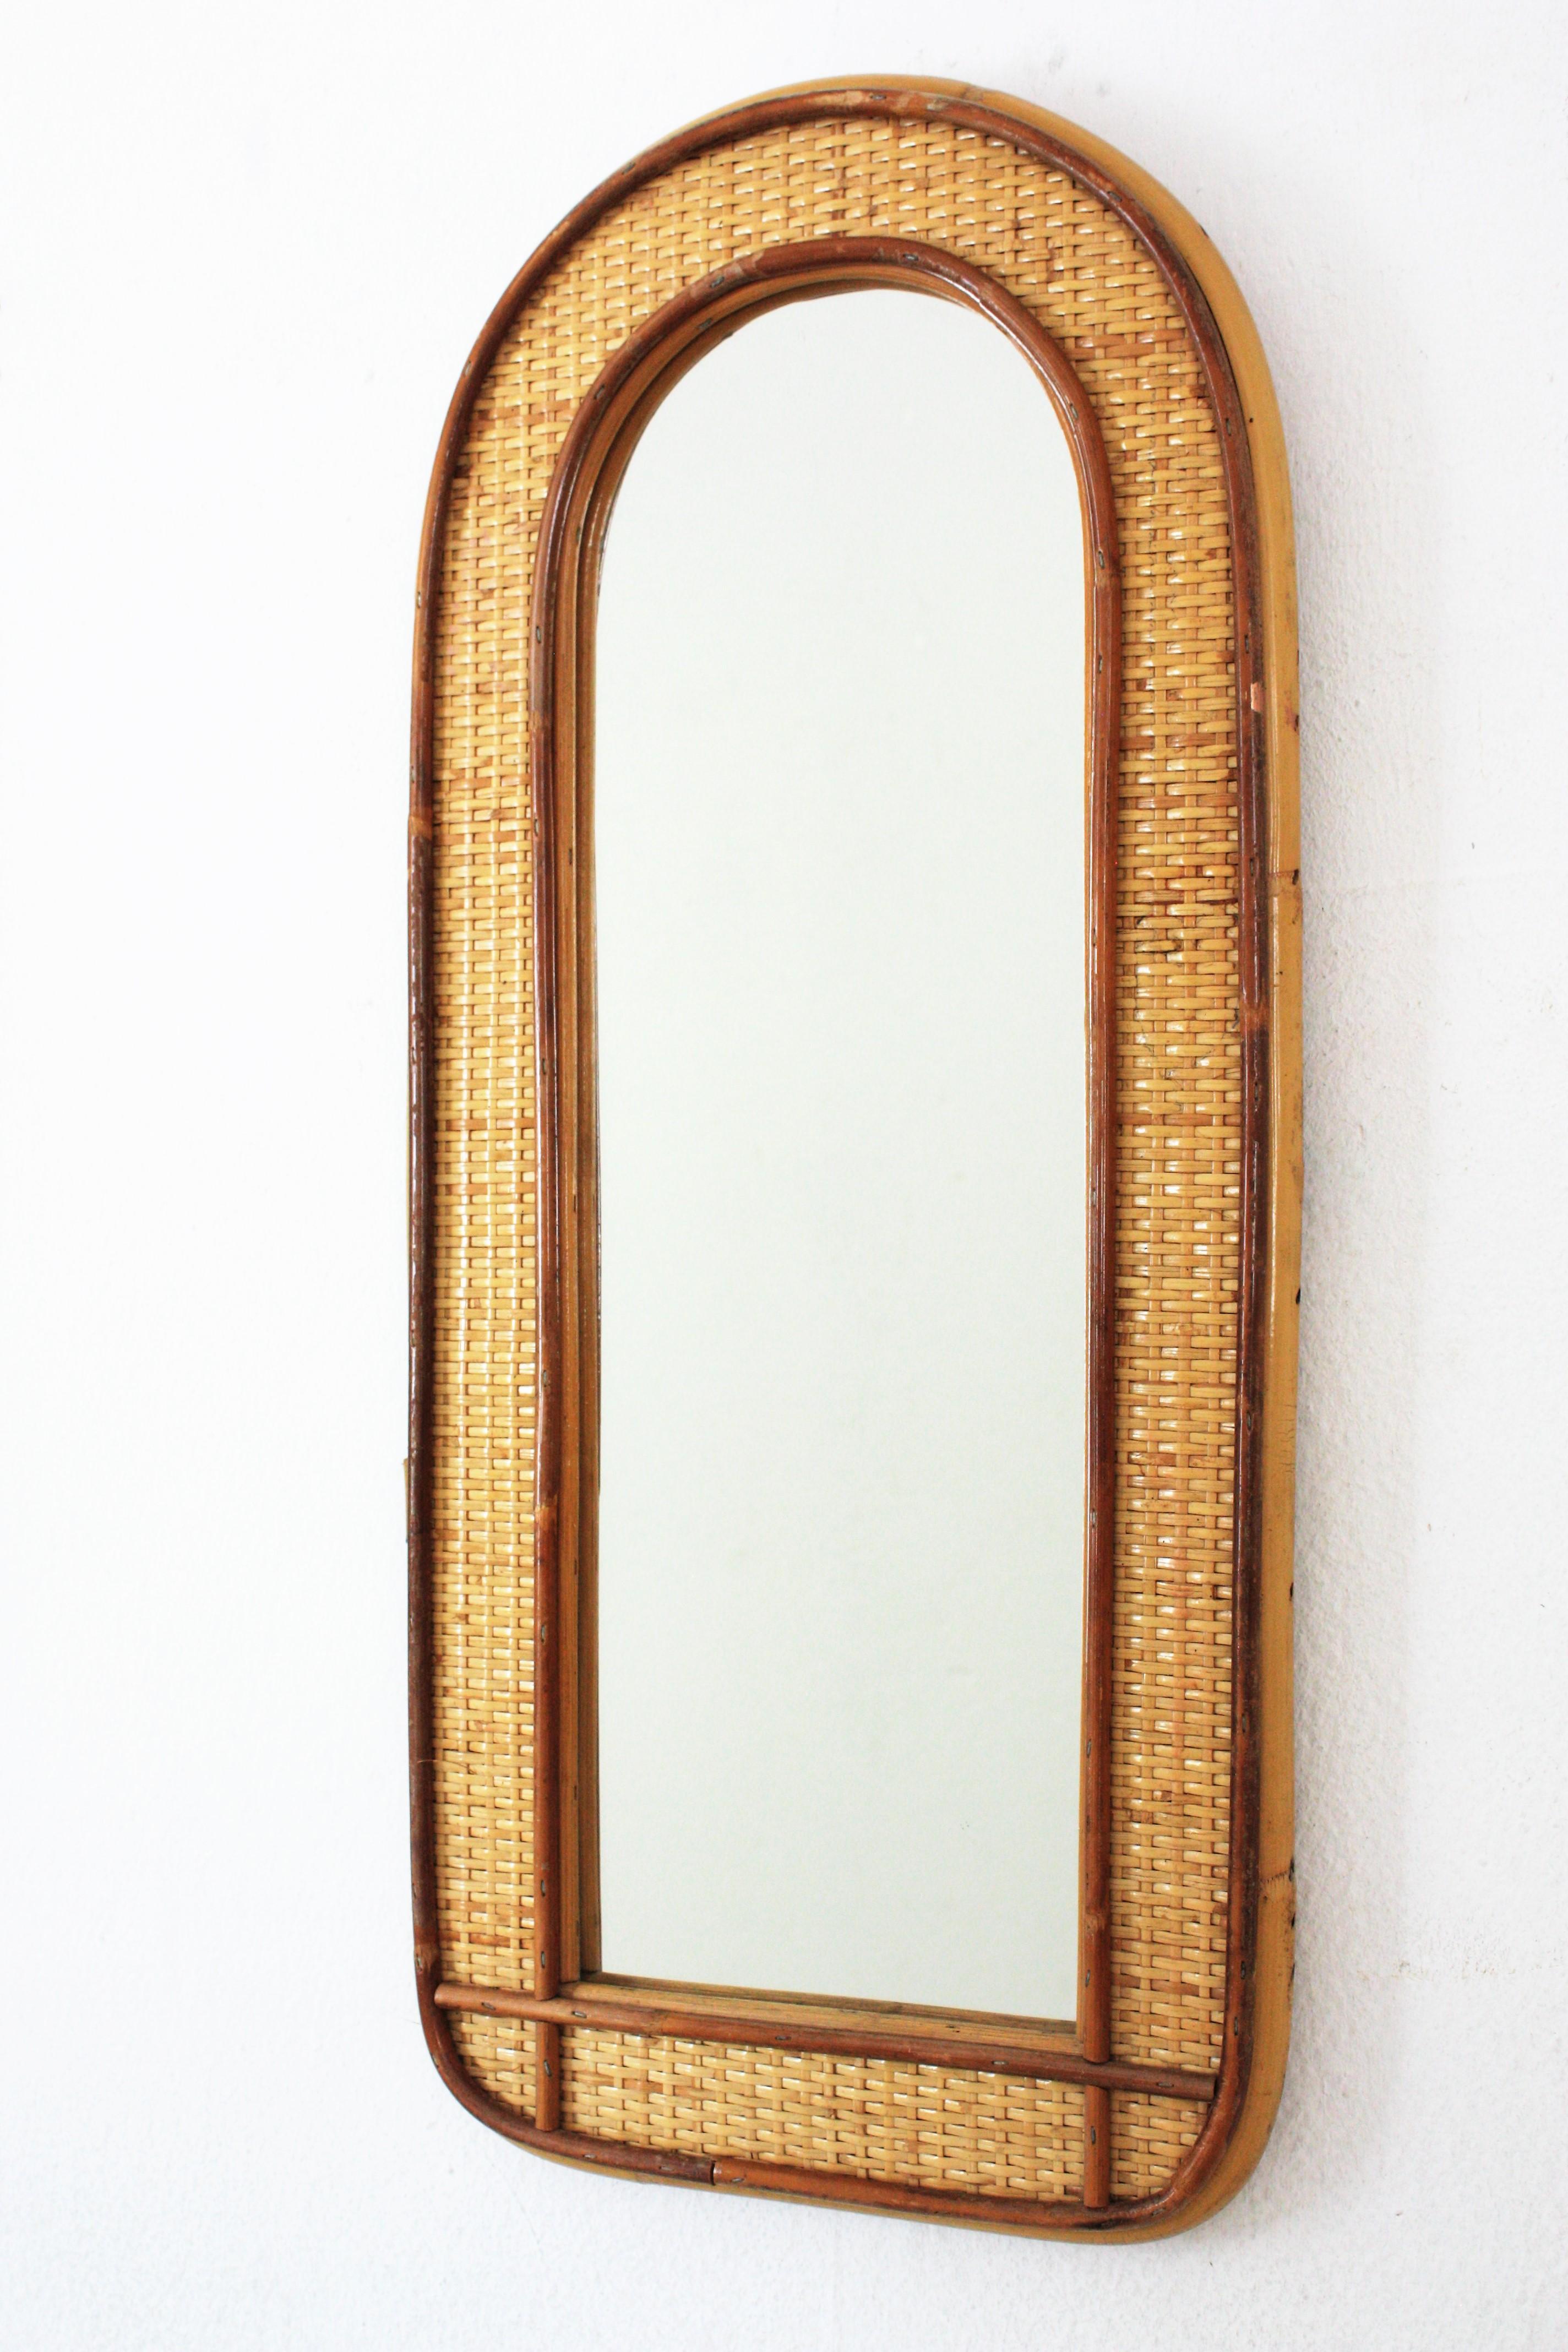 Italian Rattan Woven Wicker Wall Mirror with Arched Top For Sale